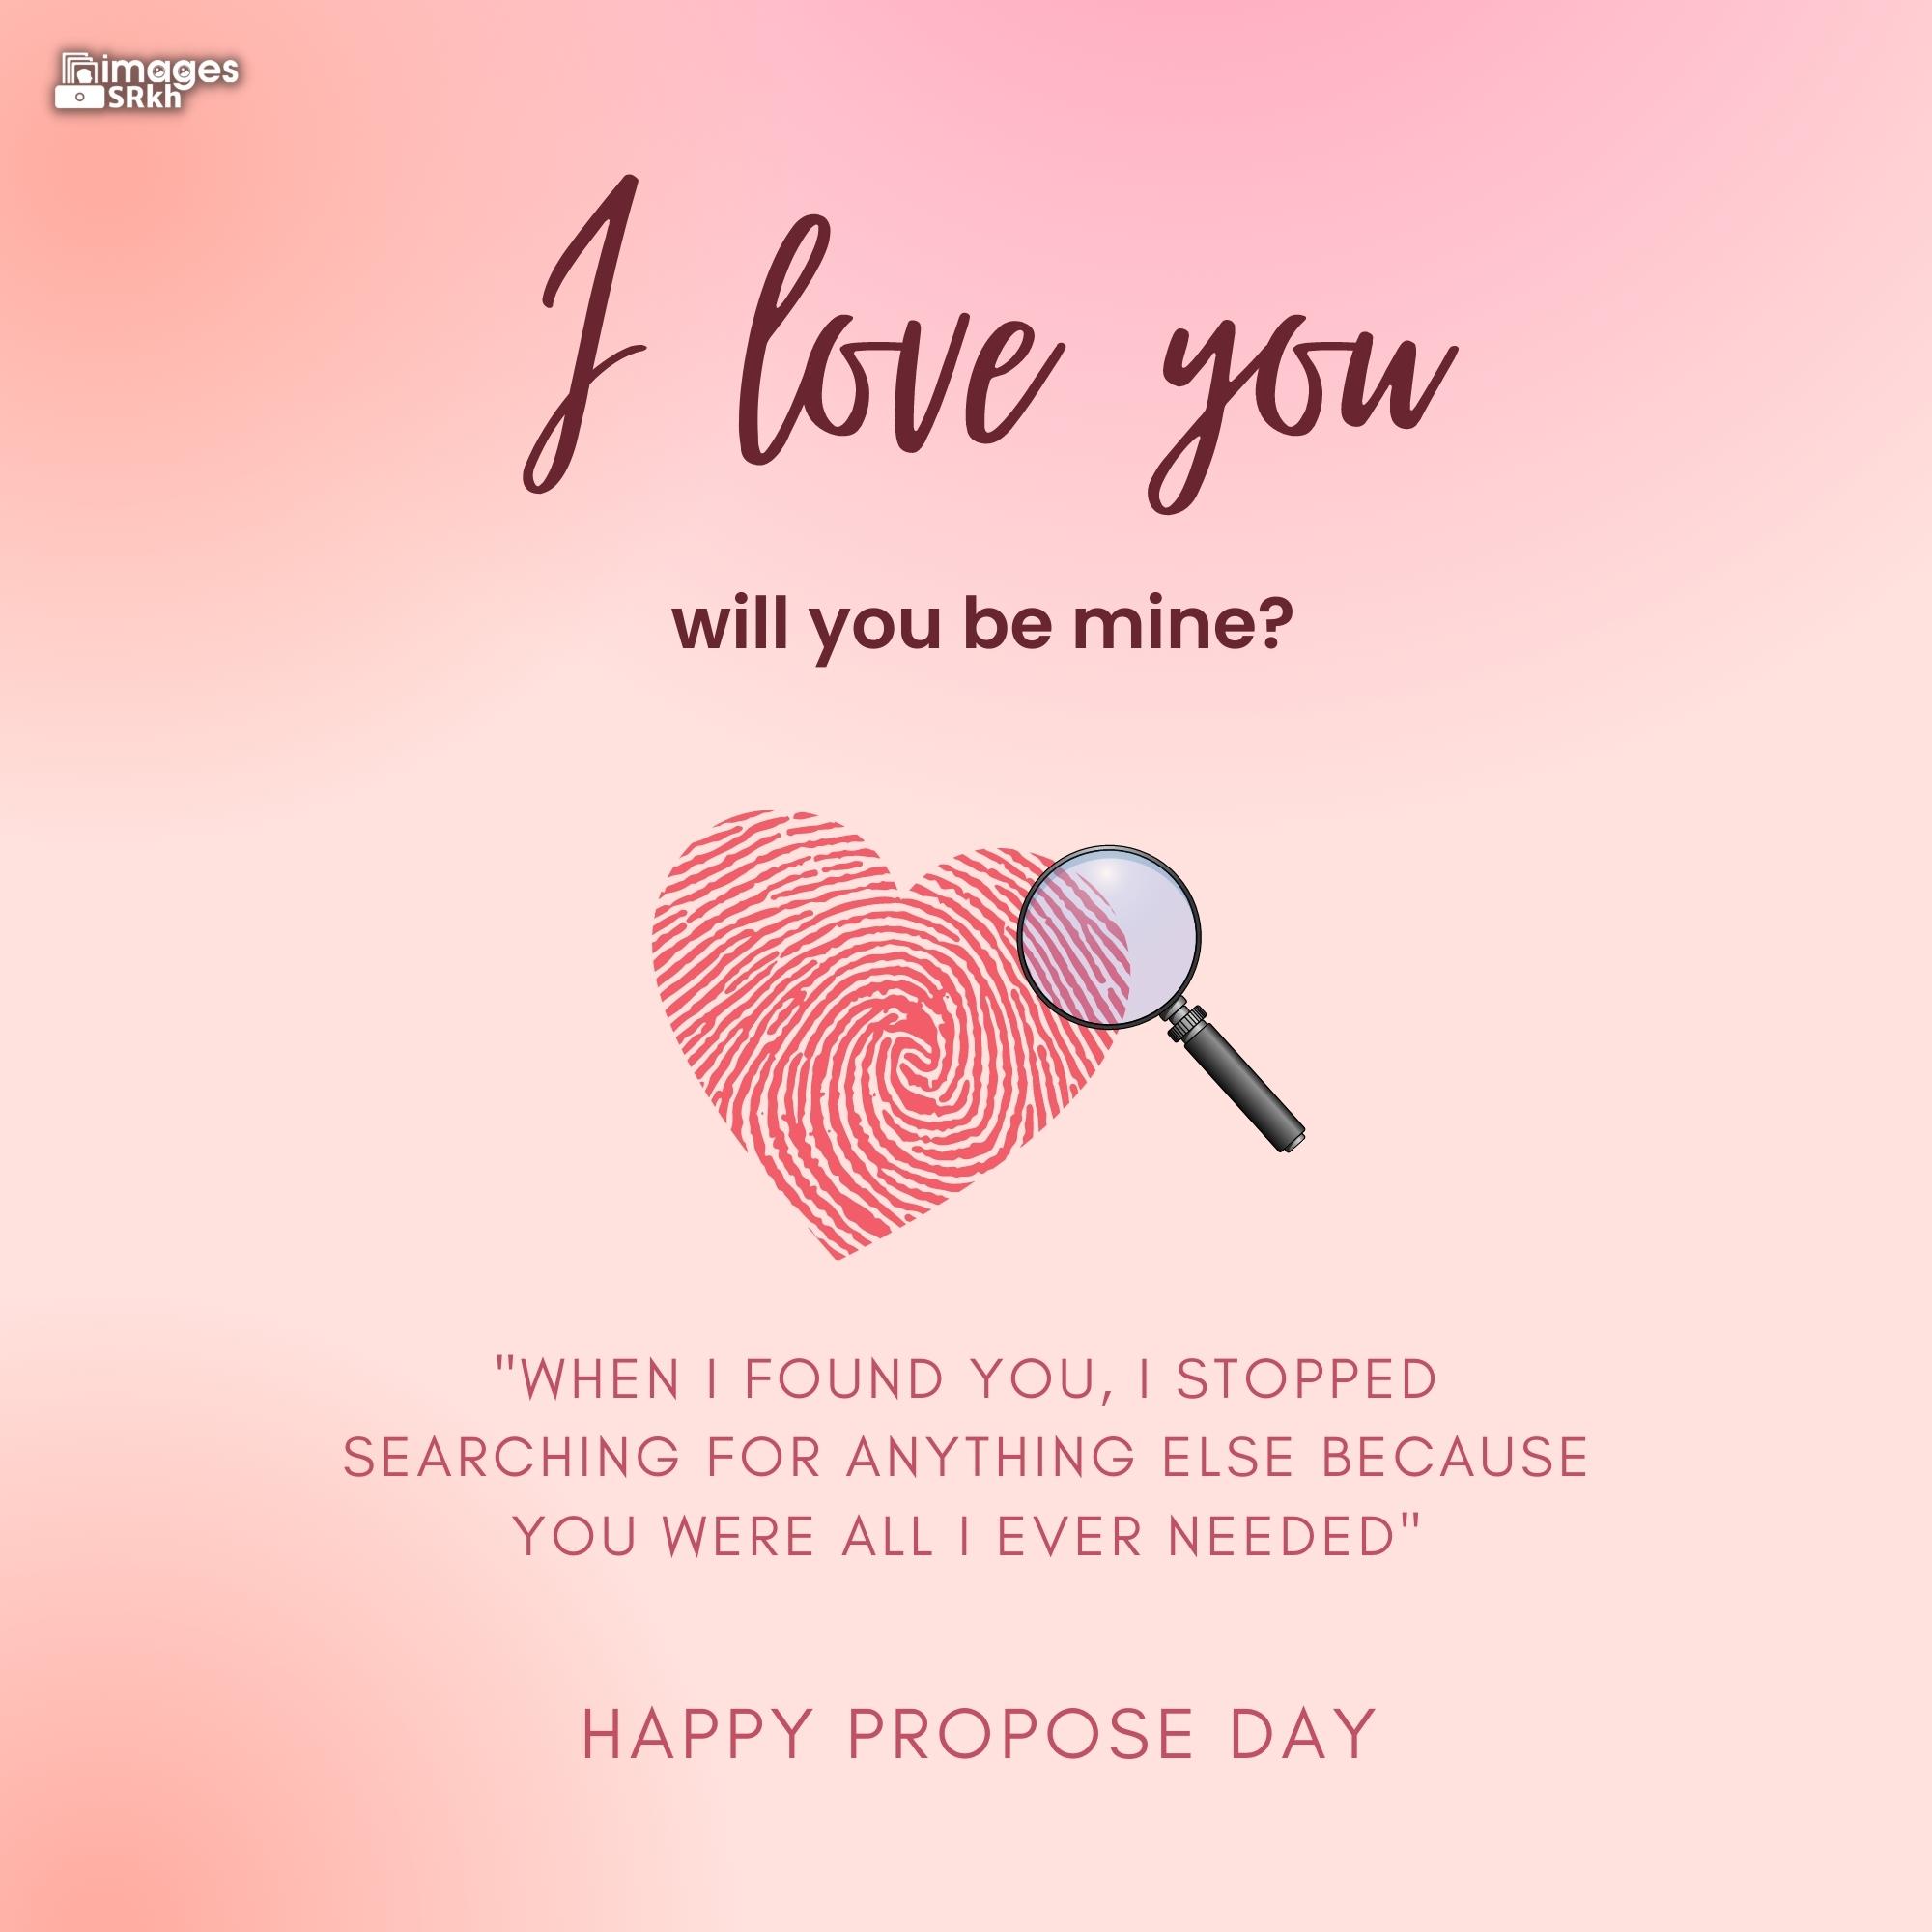 Happy Propose Day Images | 426 | I love you will you be mine